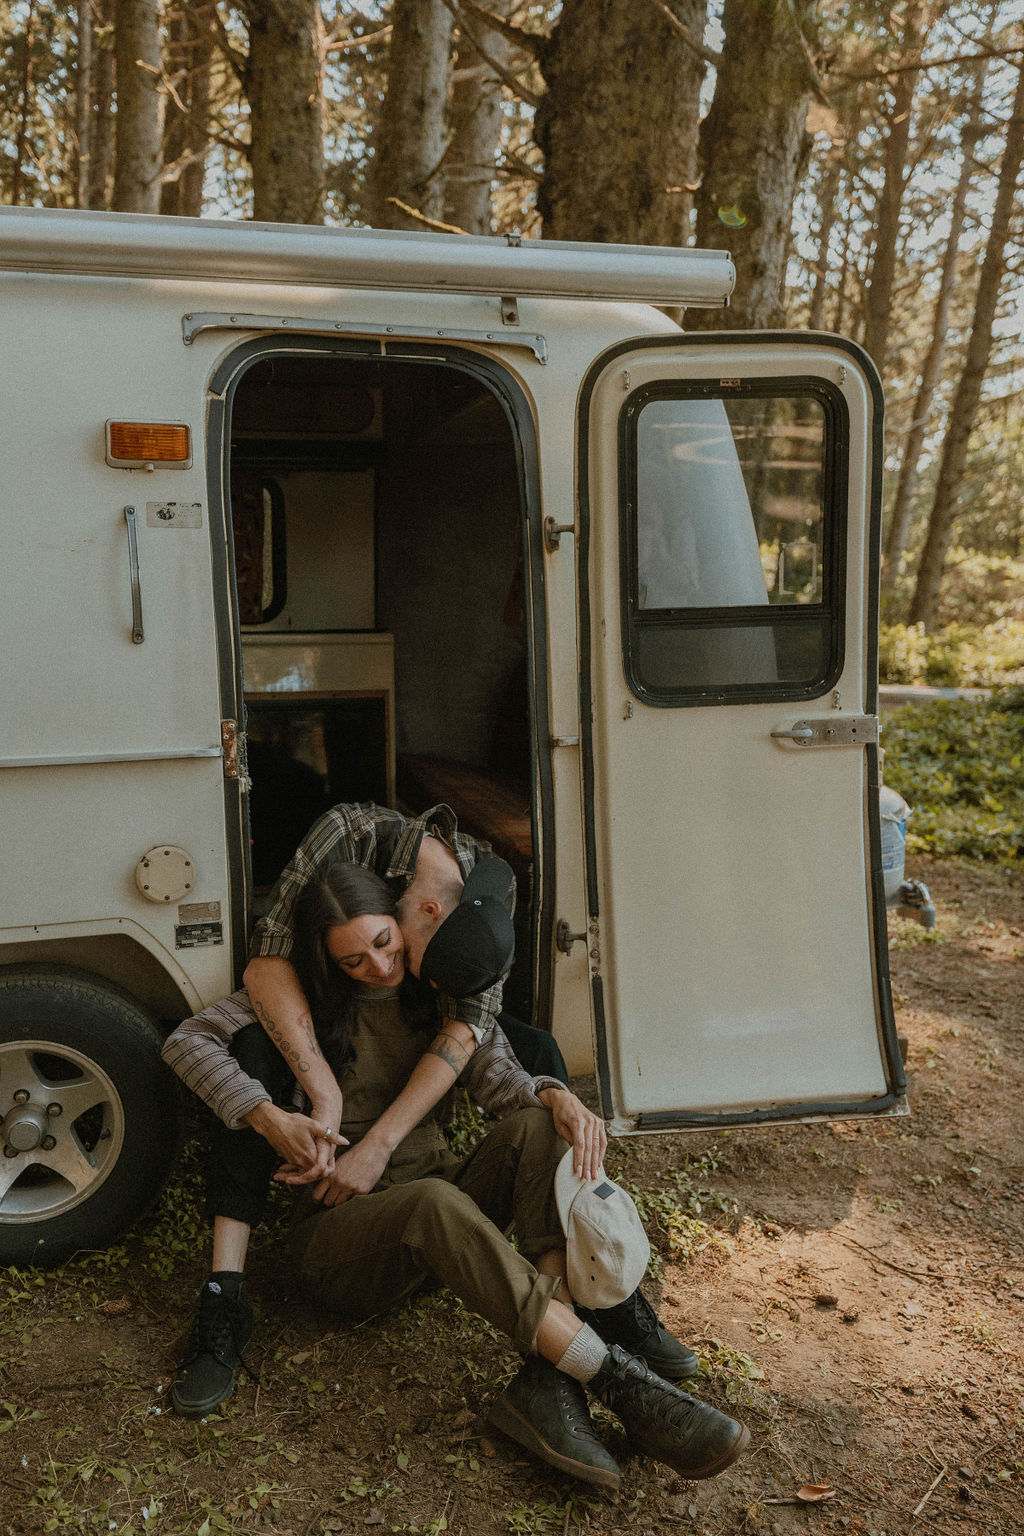 the couple cuddling in the doorway of their camper